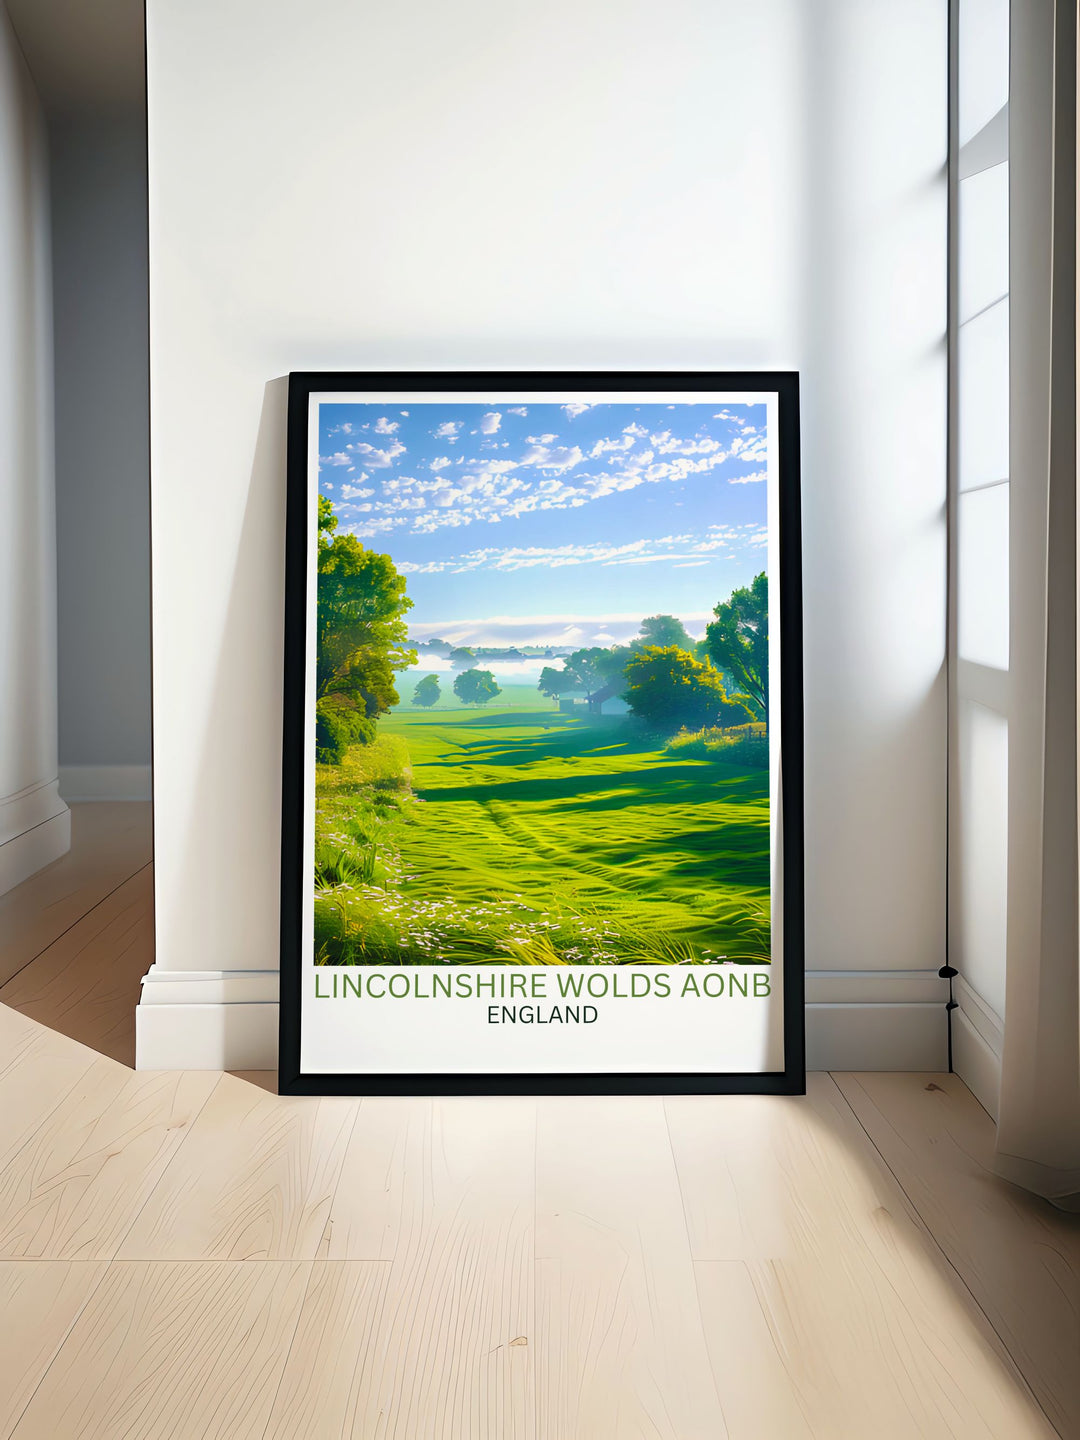 Gallery wall art featuring the scenic beauty of Lincolnshire Wolds AONB, perfect for bringing the tranquility of English countryside into your home.